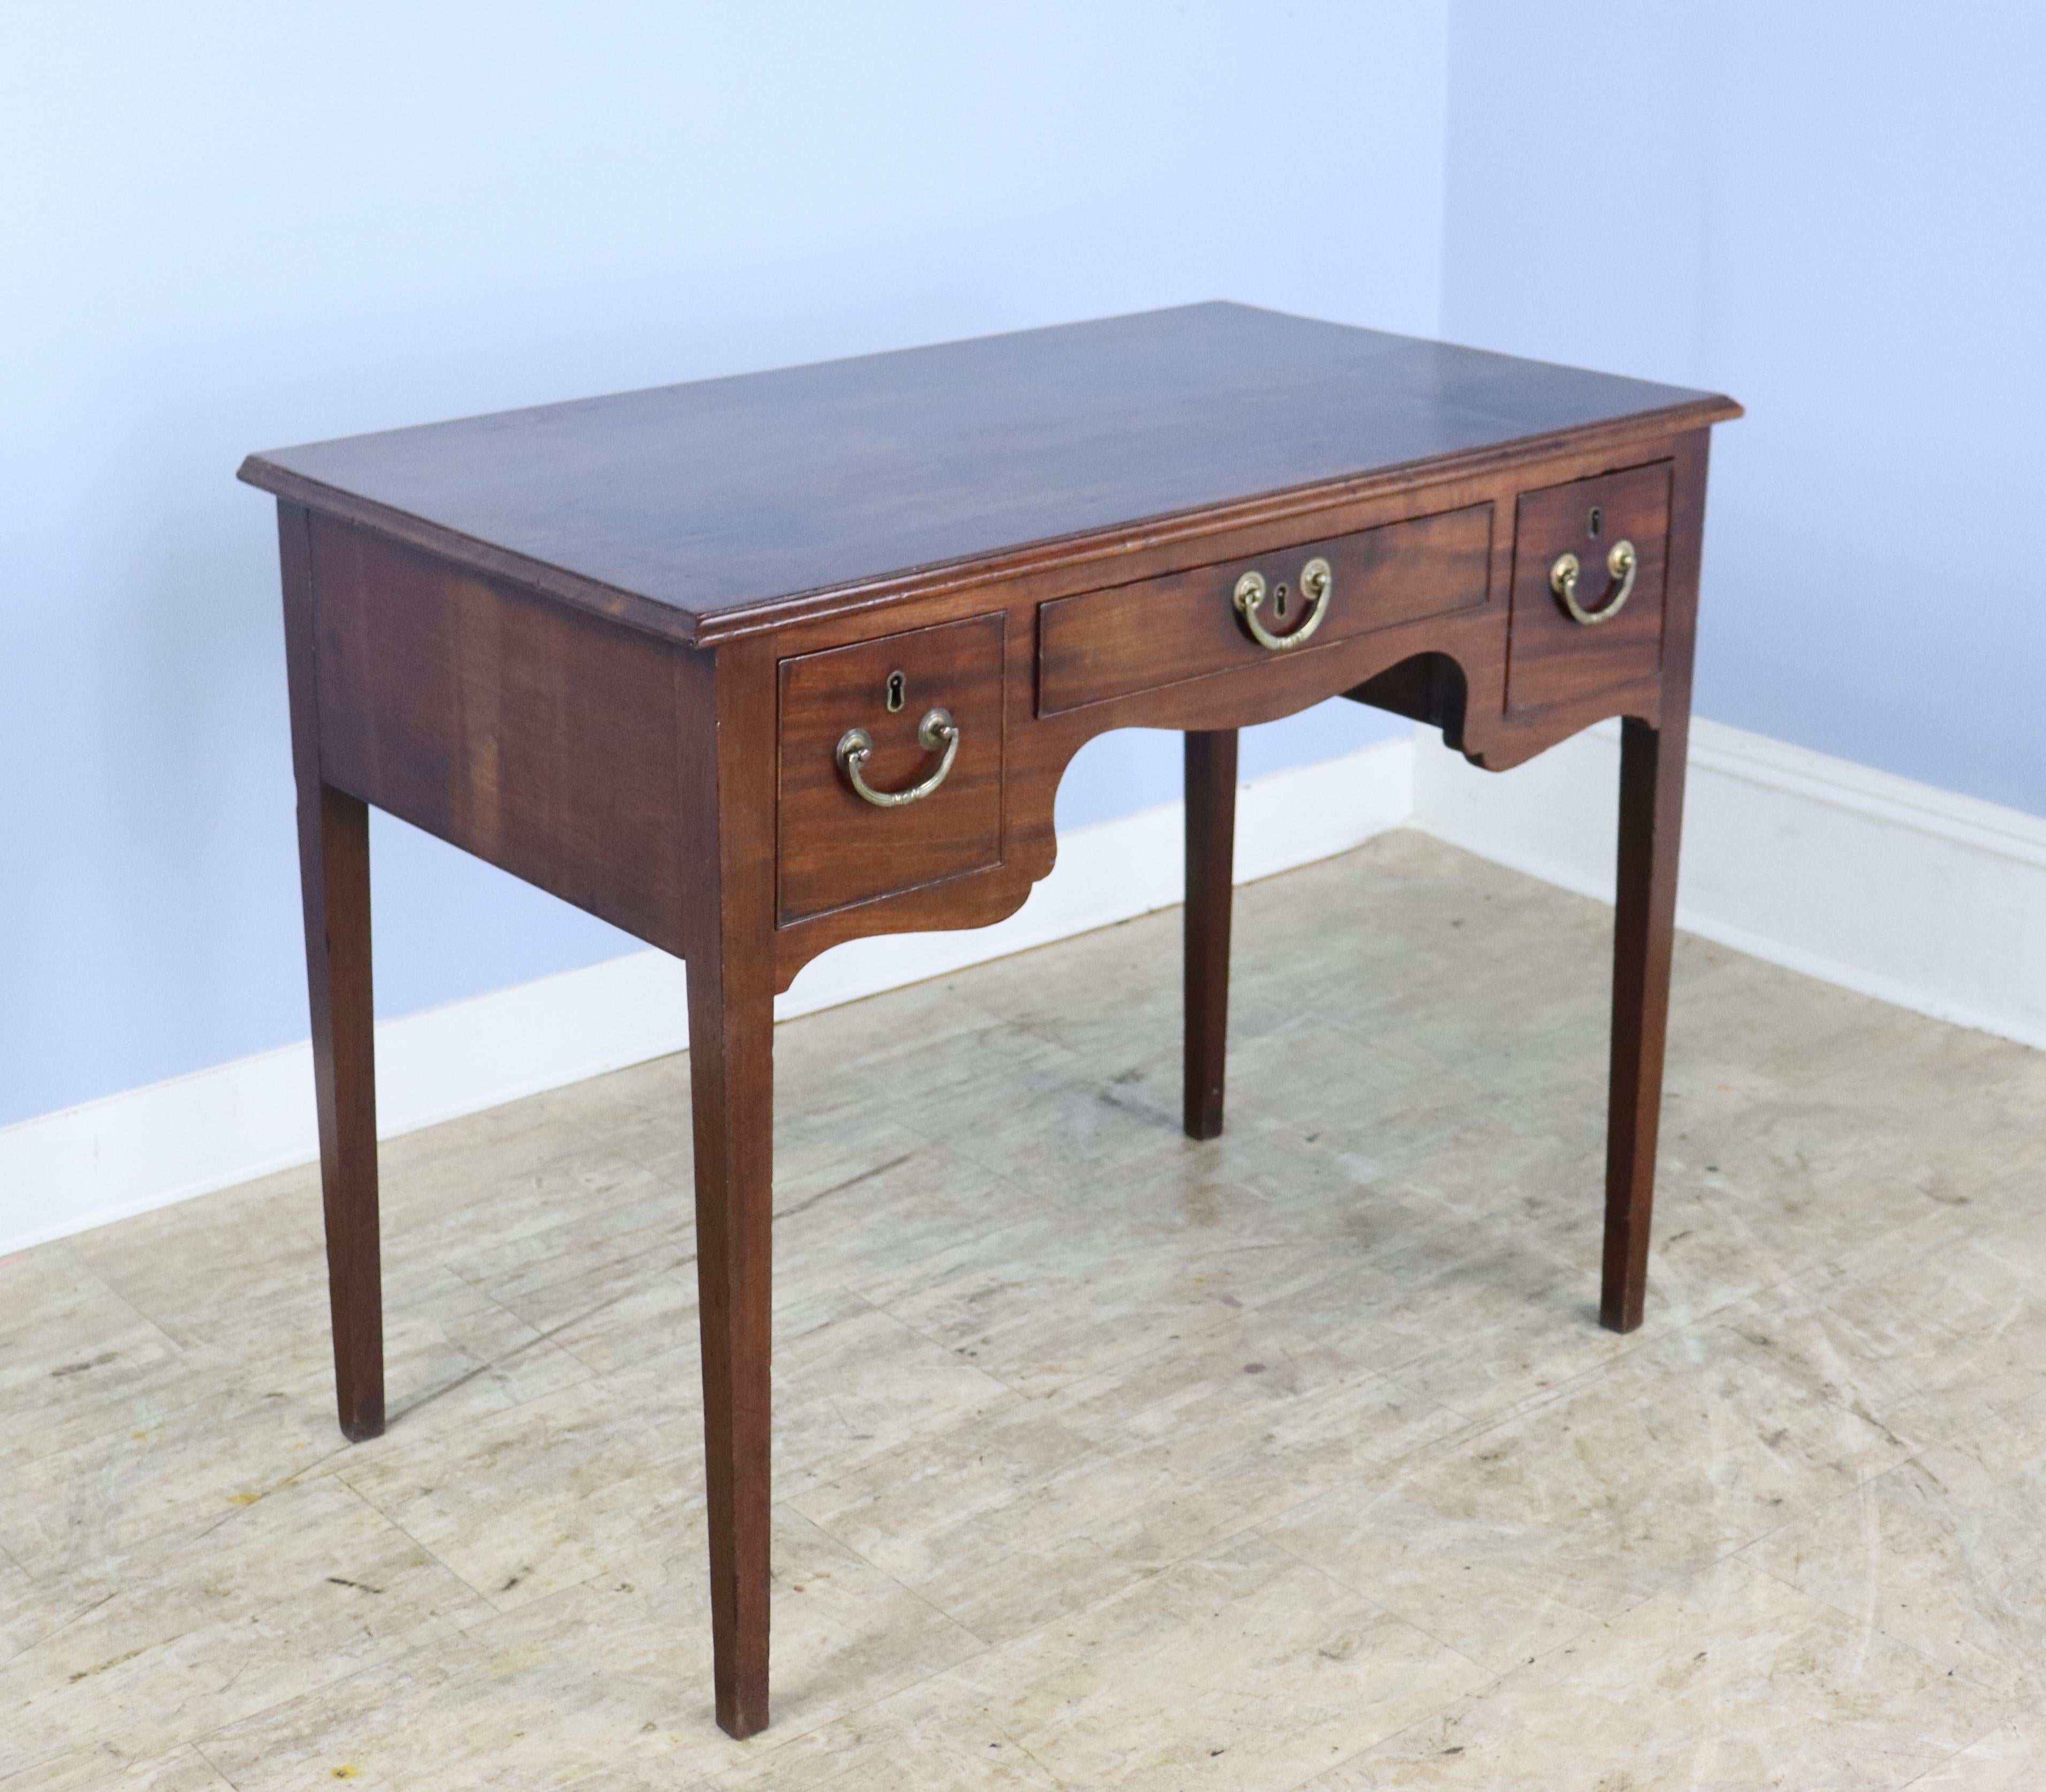 A large scale Georgian lowboy or side table with lovely scalloped aprons with three front drawers, all with good cockbeading at the edges. The top has a very handsome molding around the edge.  With lovely color and patina on the mahogany top, this